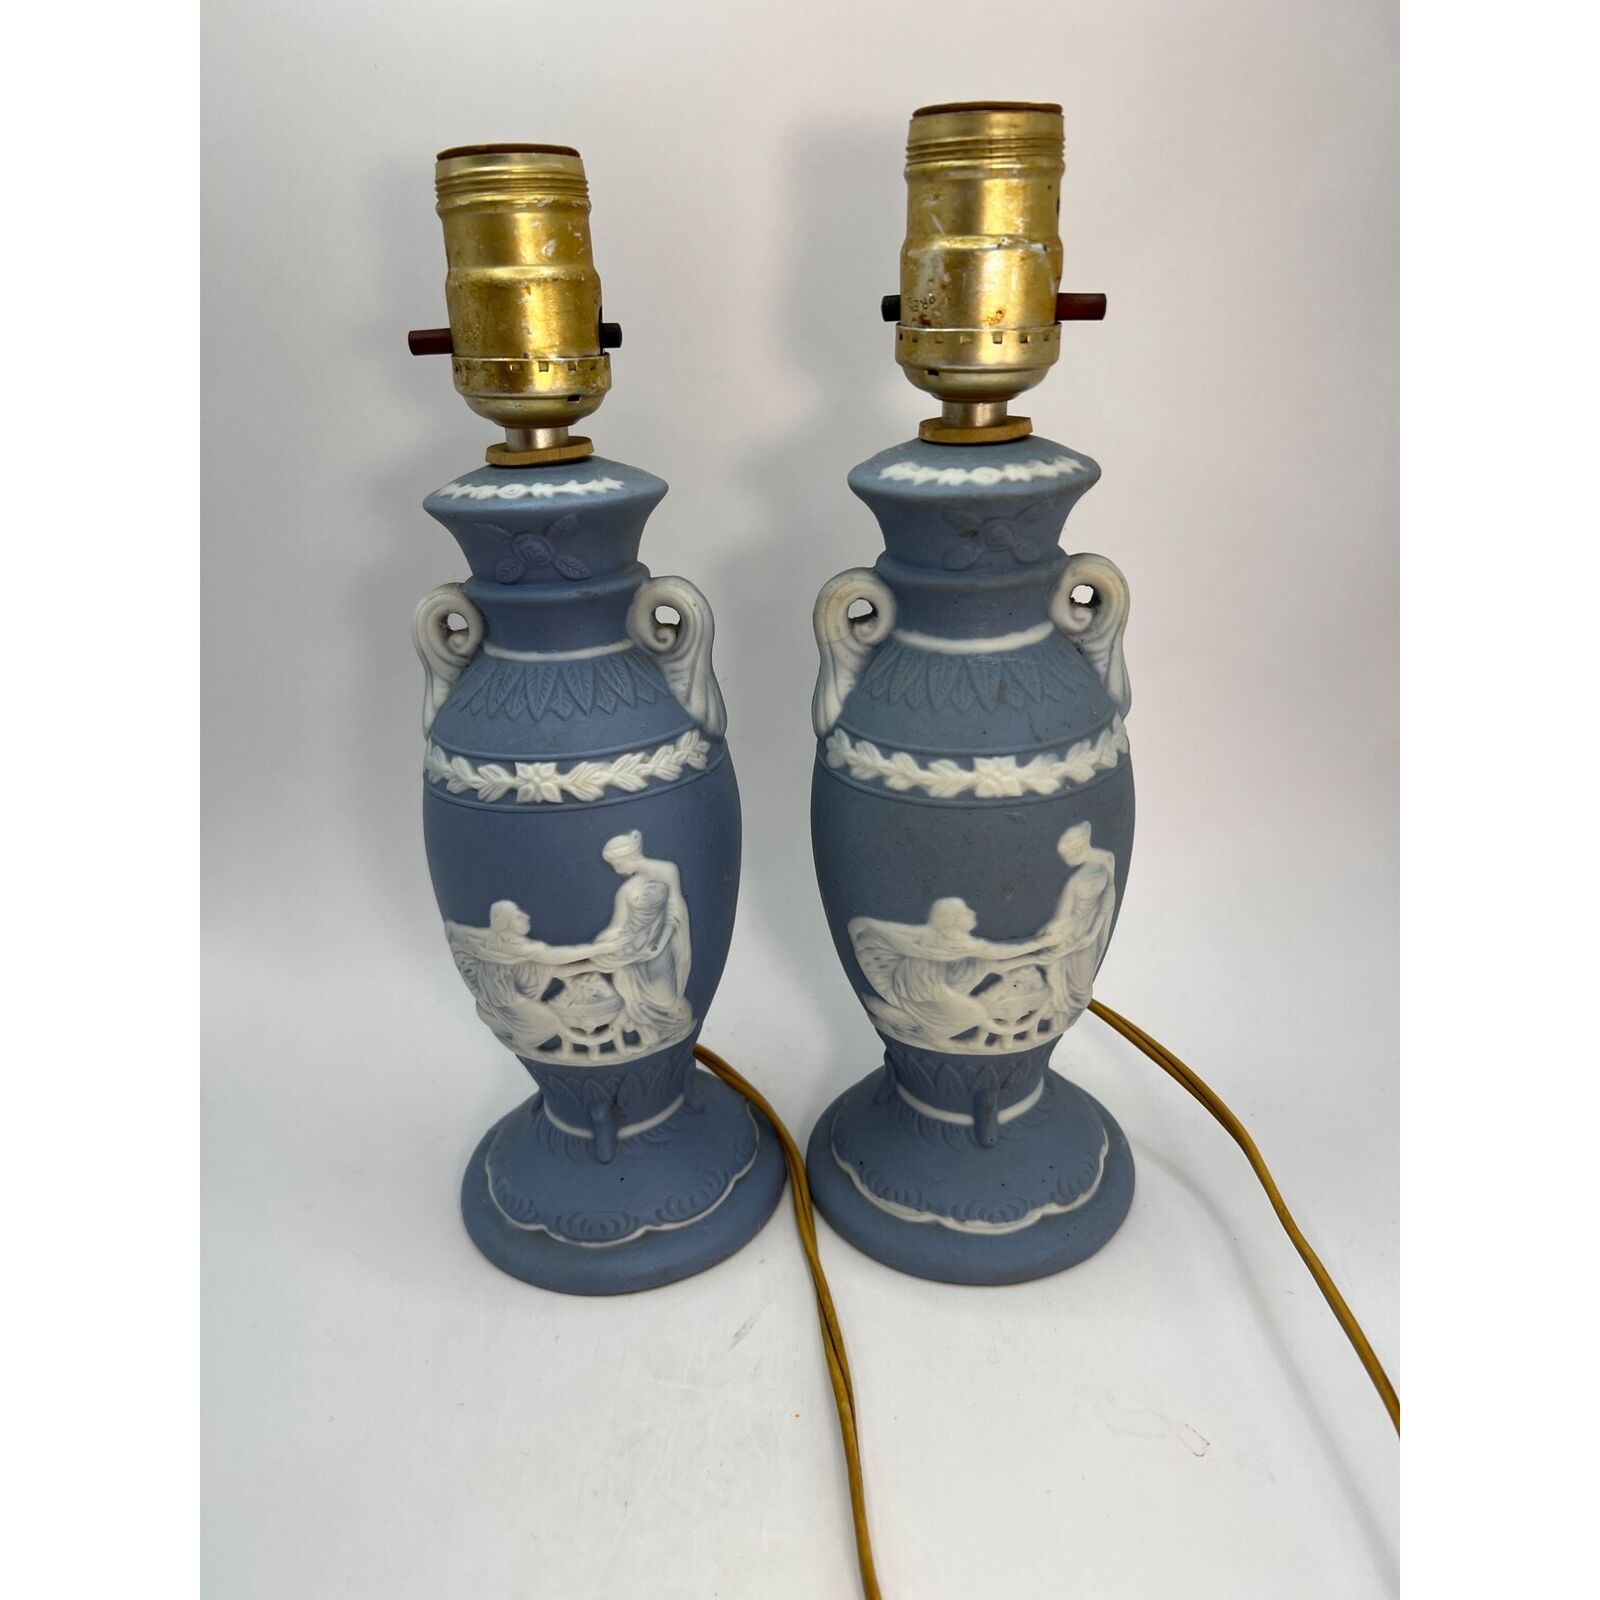 Vtg Pair Of Wedgewood Style Blue Lamps, Made In Occupied Japan, Needs Rewiring